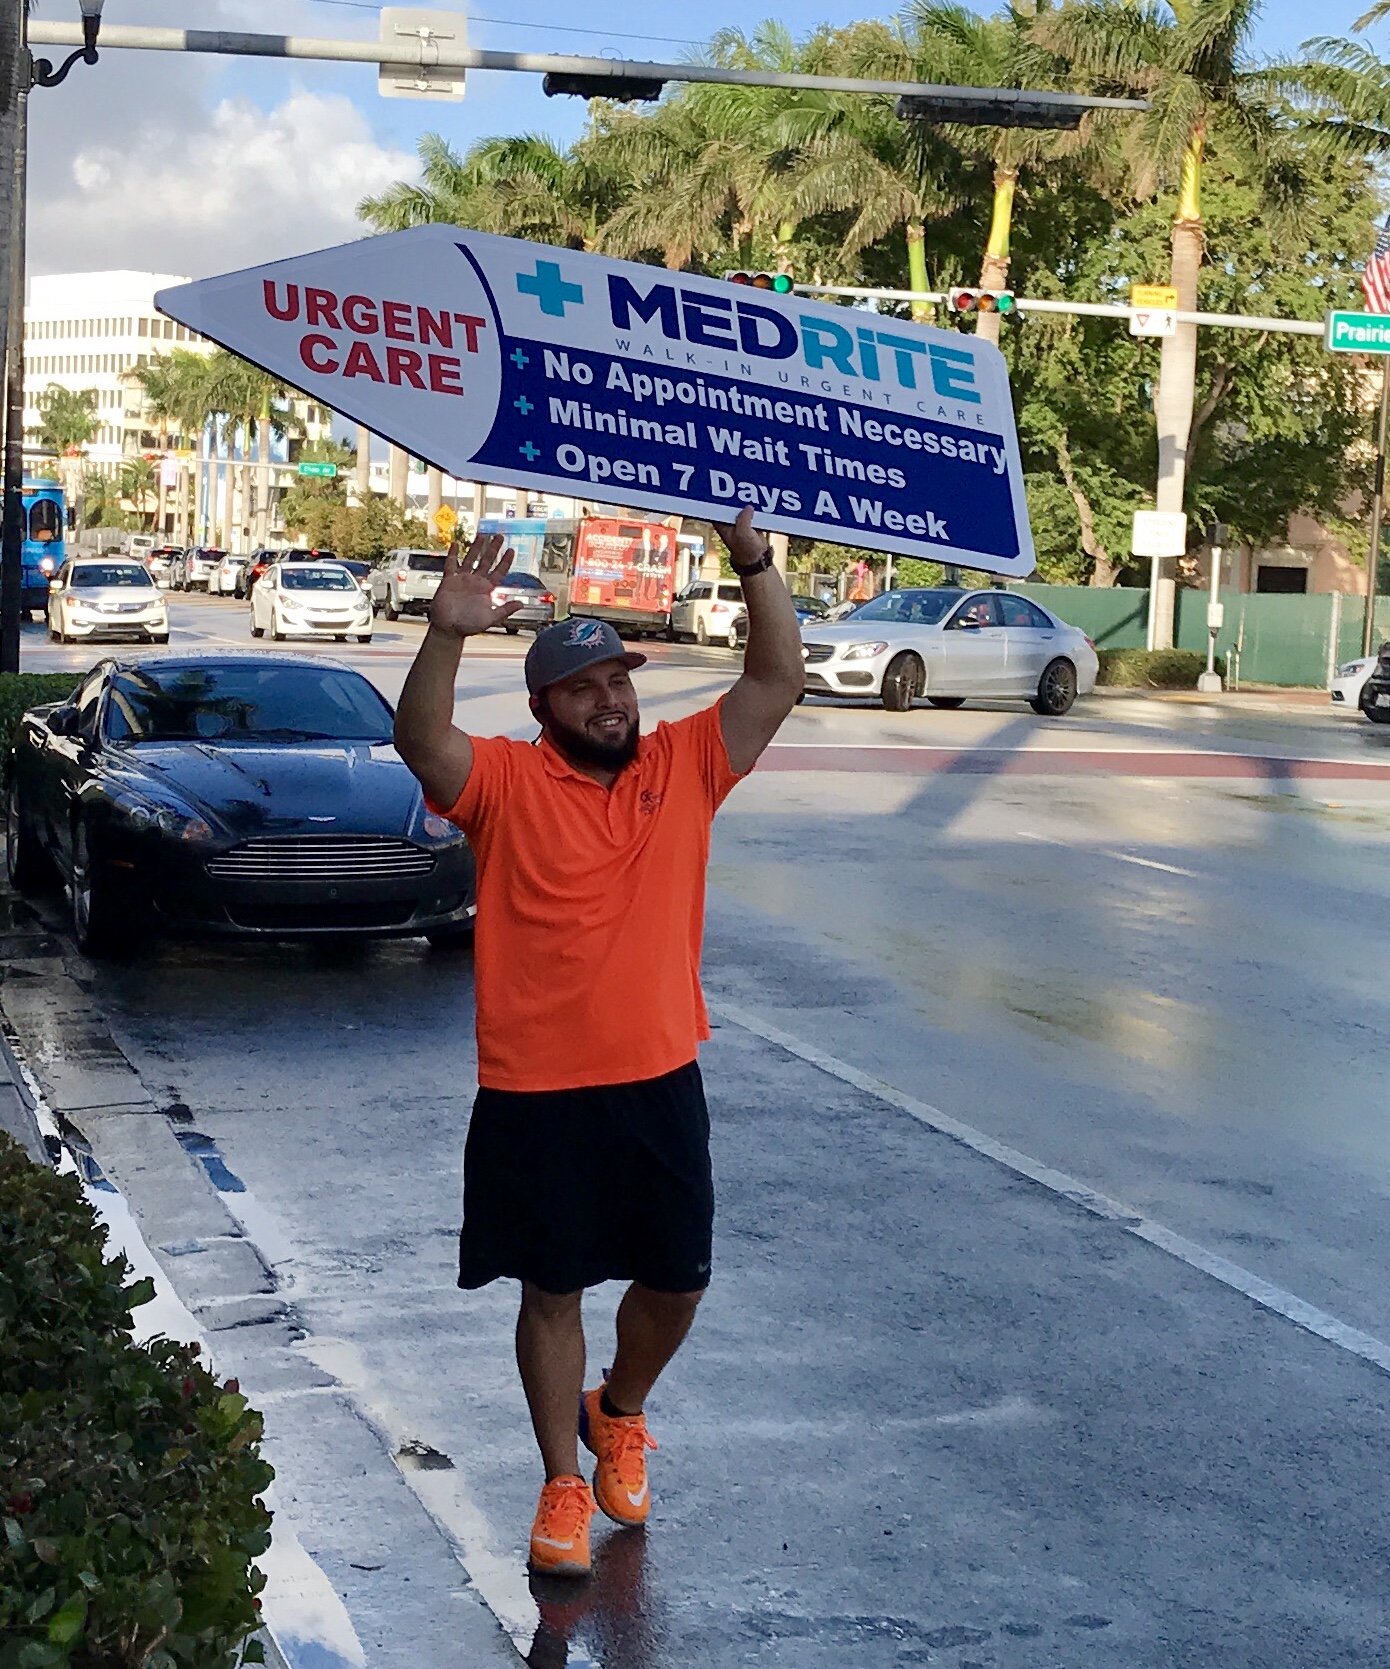 Sign Spinners for MedRite Miami